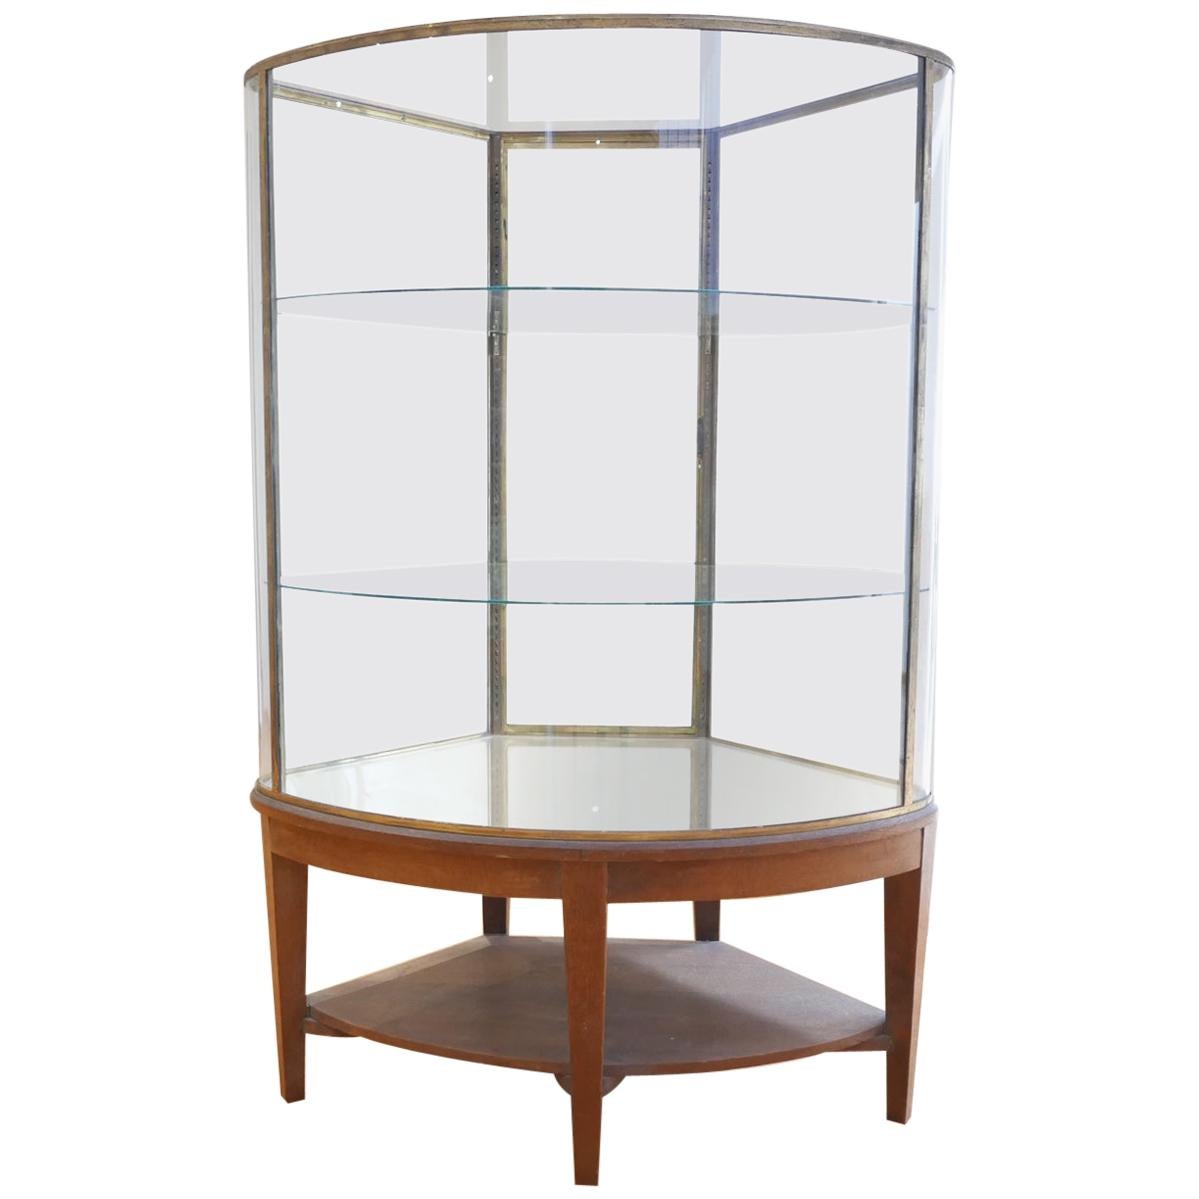 Exceptional Early 20th Century English Bow Glass Display Cabinet For Sale